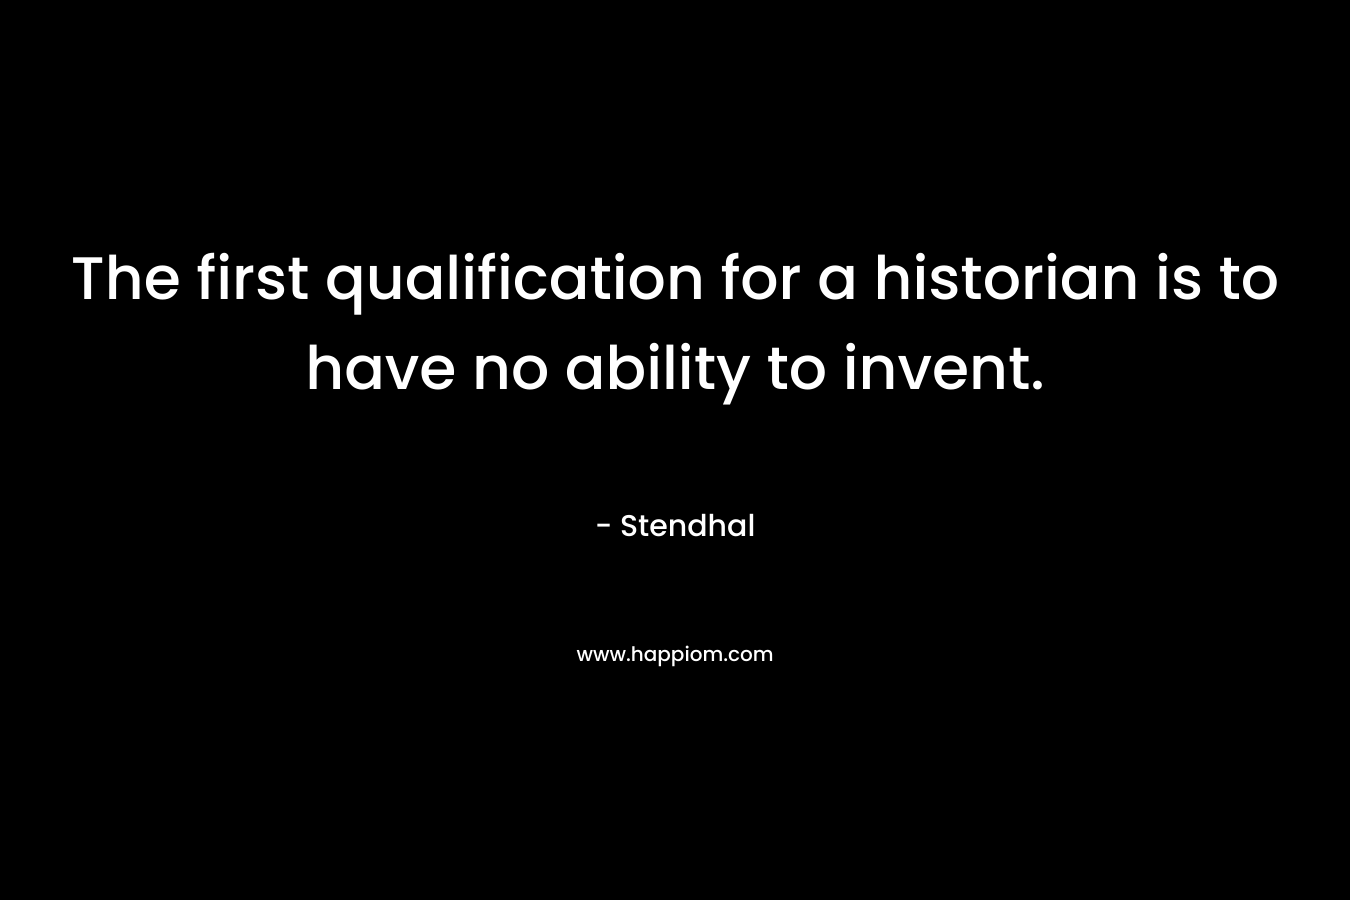 The first qualification for a historian is to have no ability to invent. – Stendhal